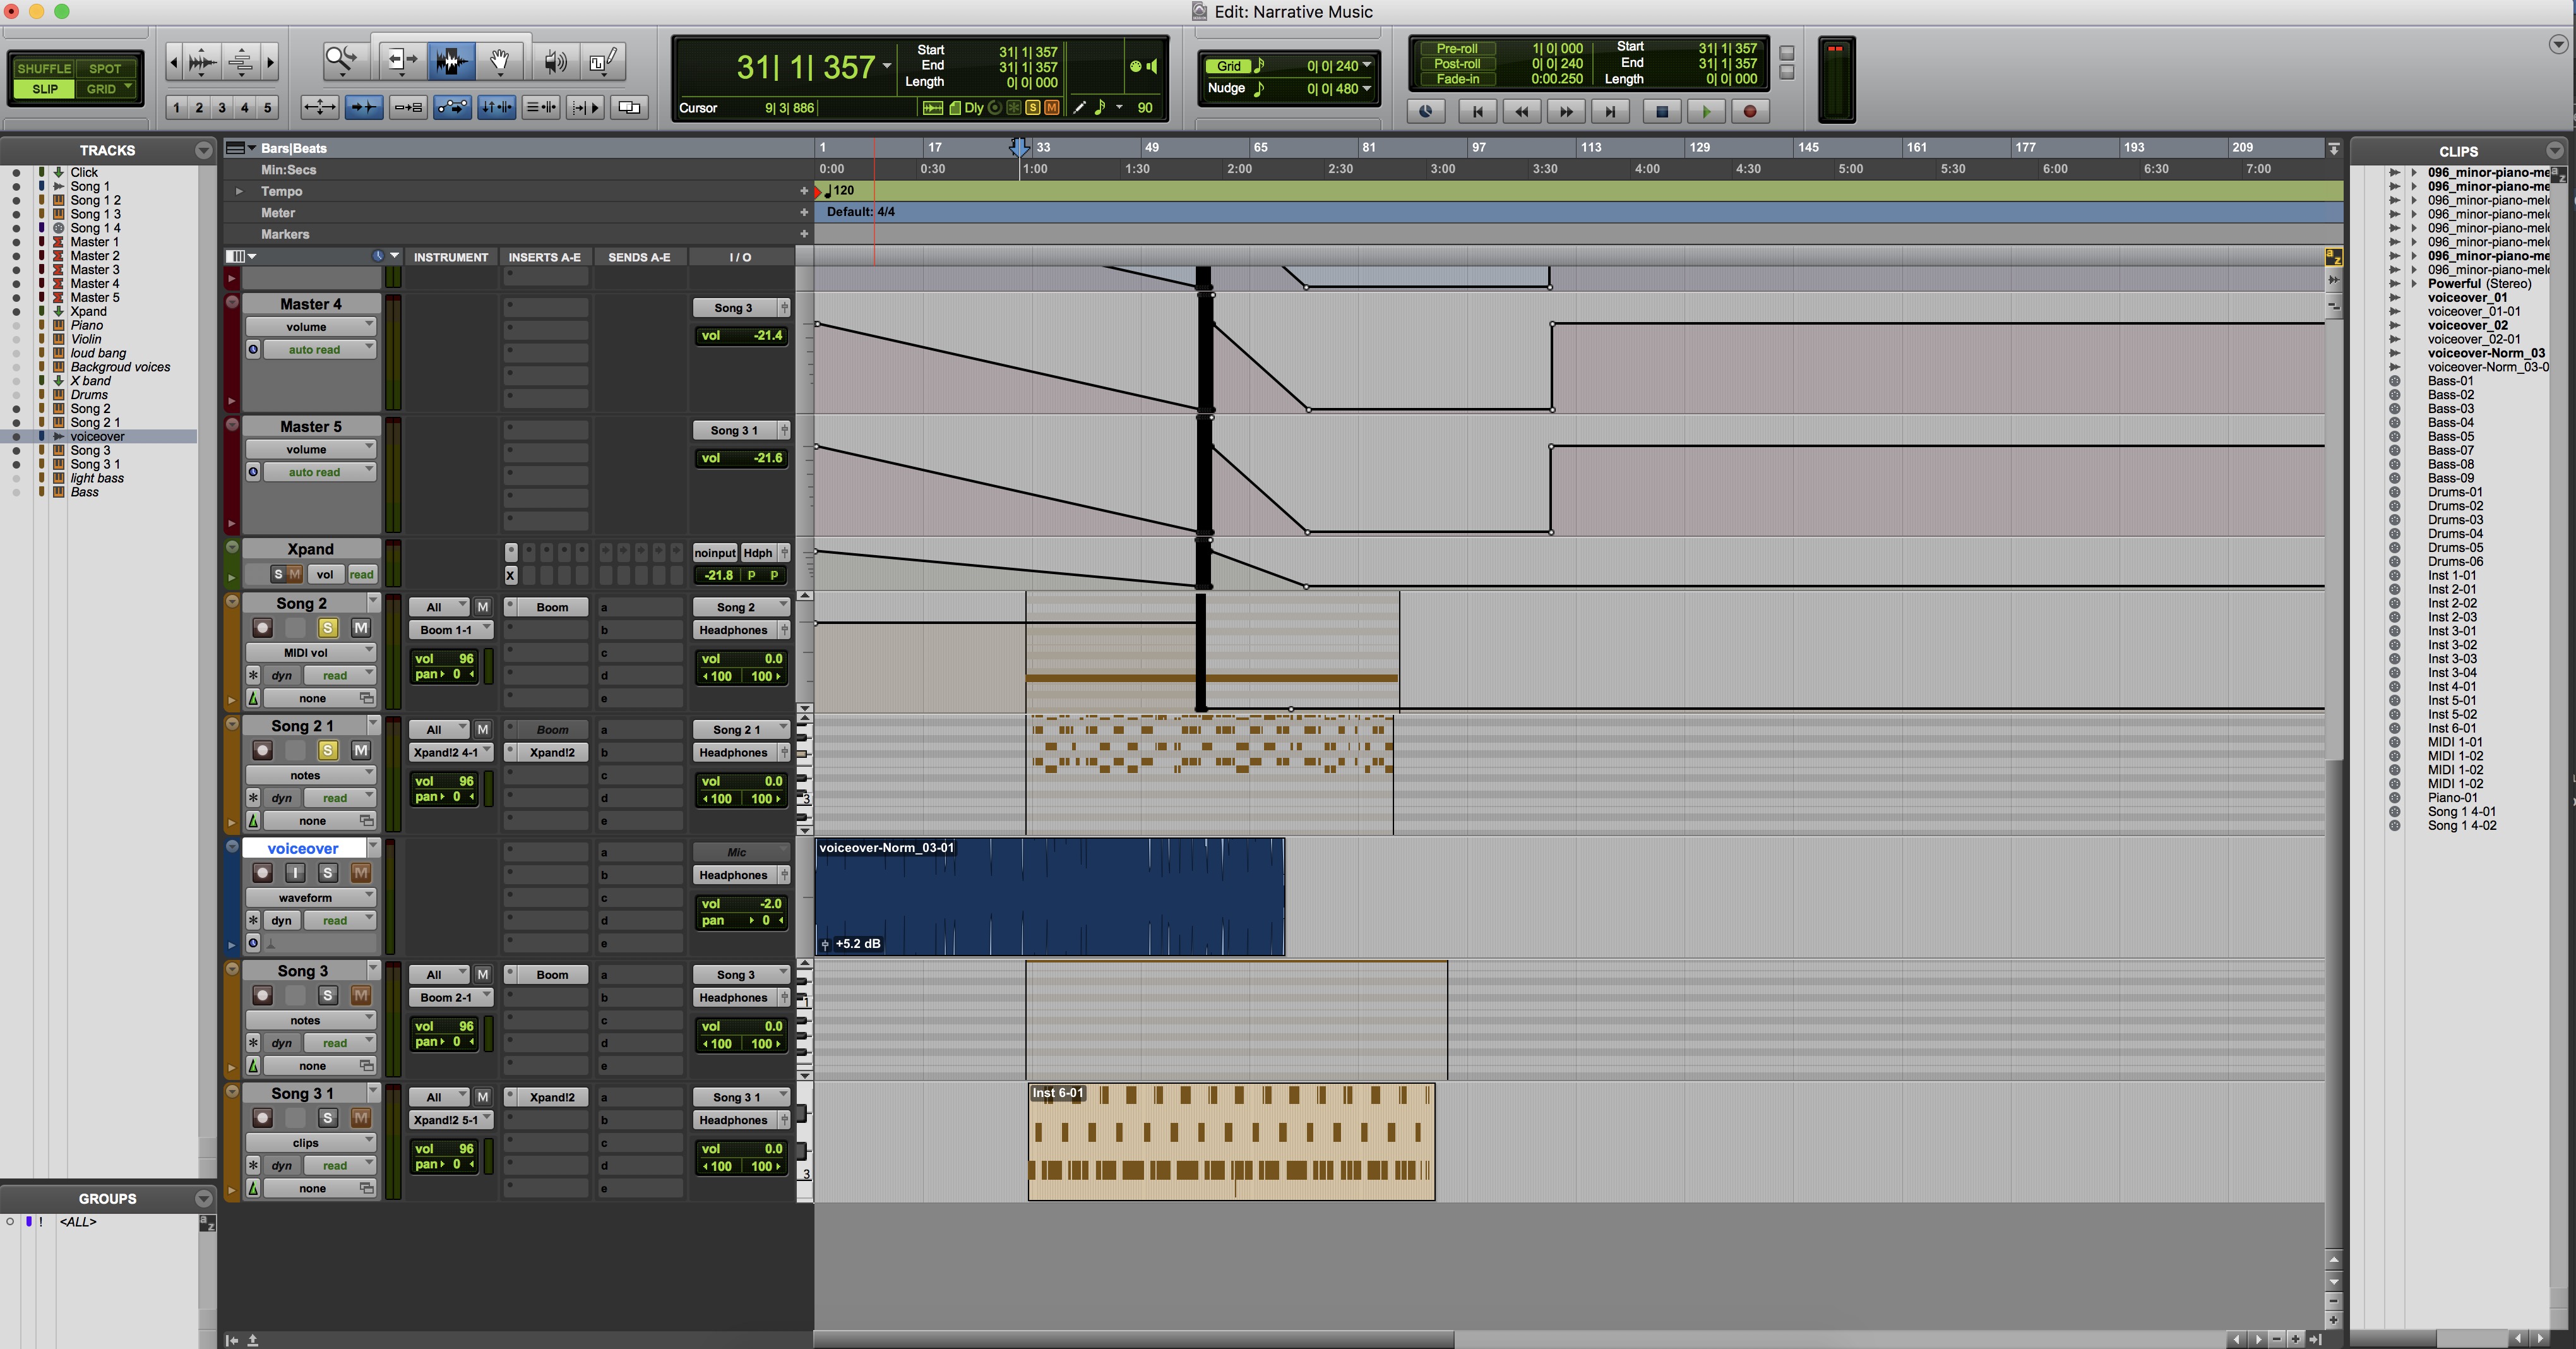 This is a screenshot of my pro tools session.